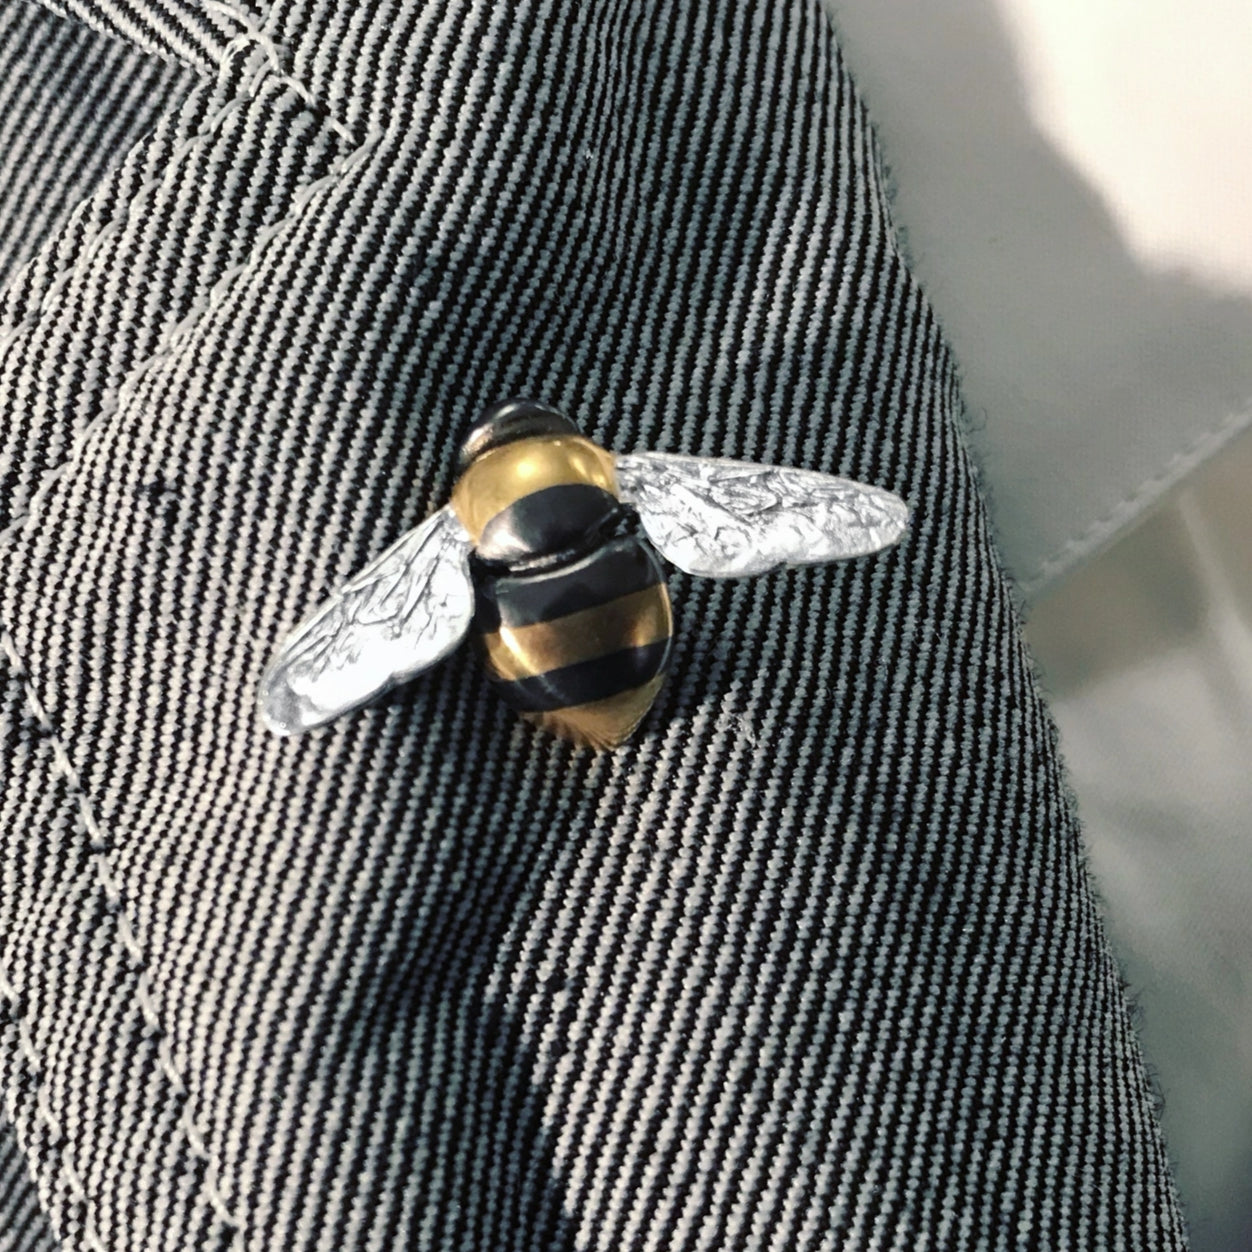 Wright & Teague Bee striped pin. Silver, gold vermeil, black rhodium. Worn on the lapel of a light jacket.